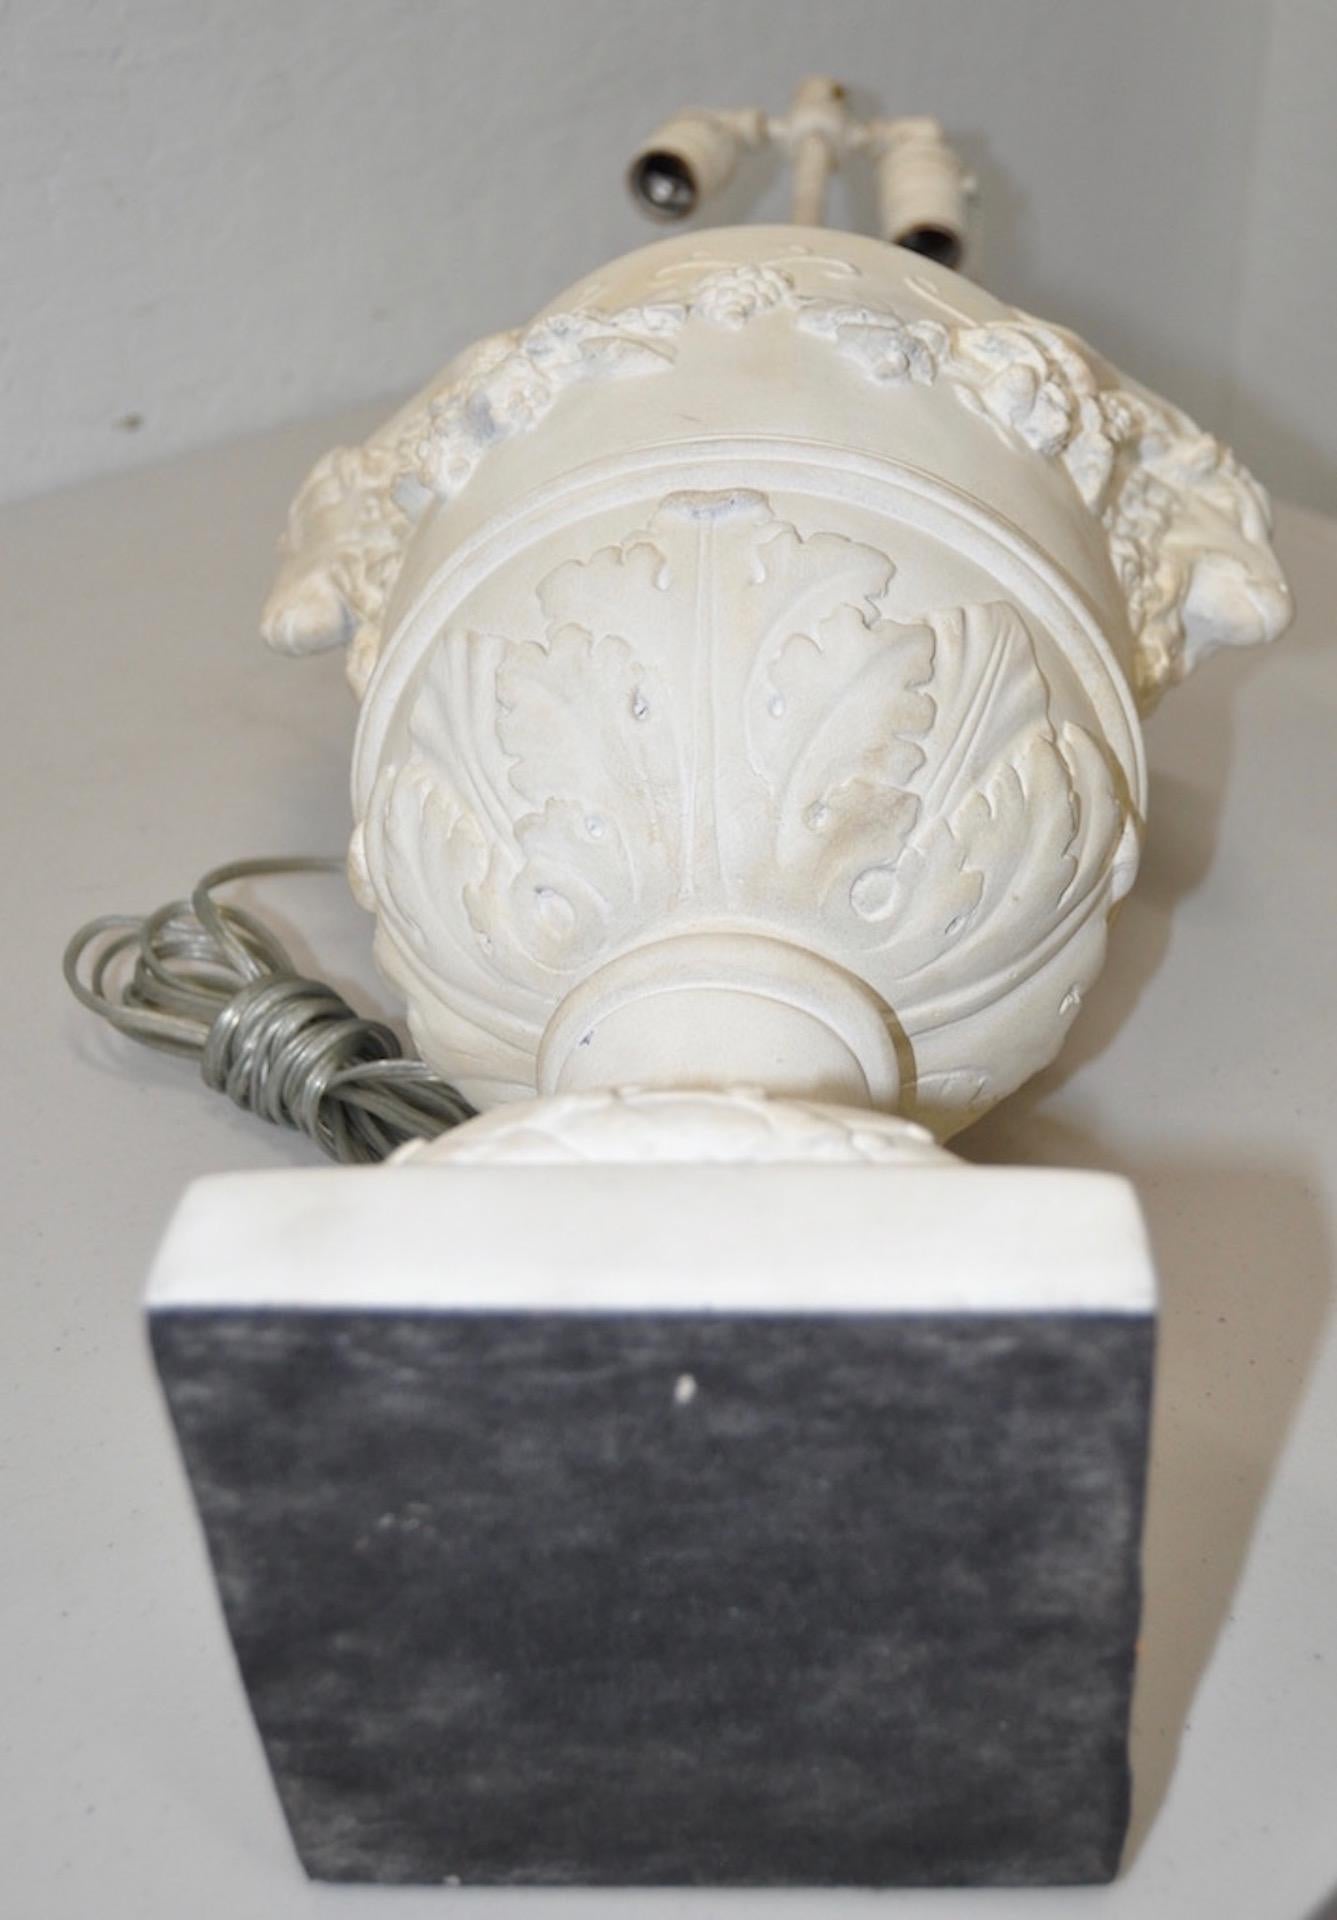 Cast Elegant Plaster Urn Lamp with Rams Head Handles, circa 1950s For Sale